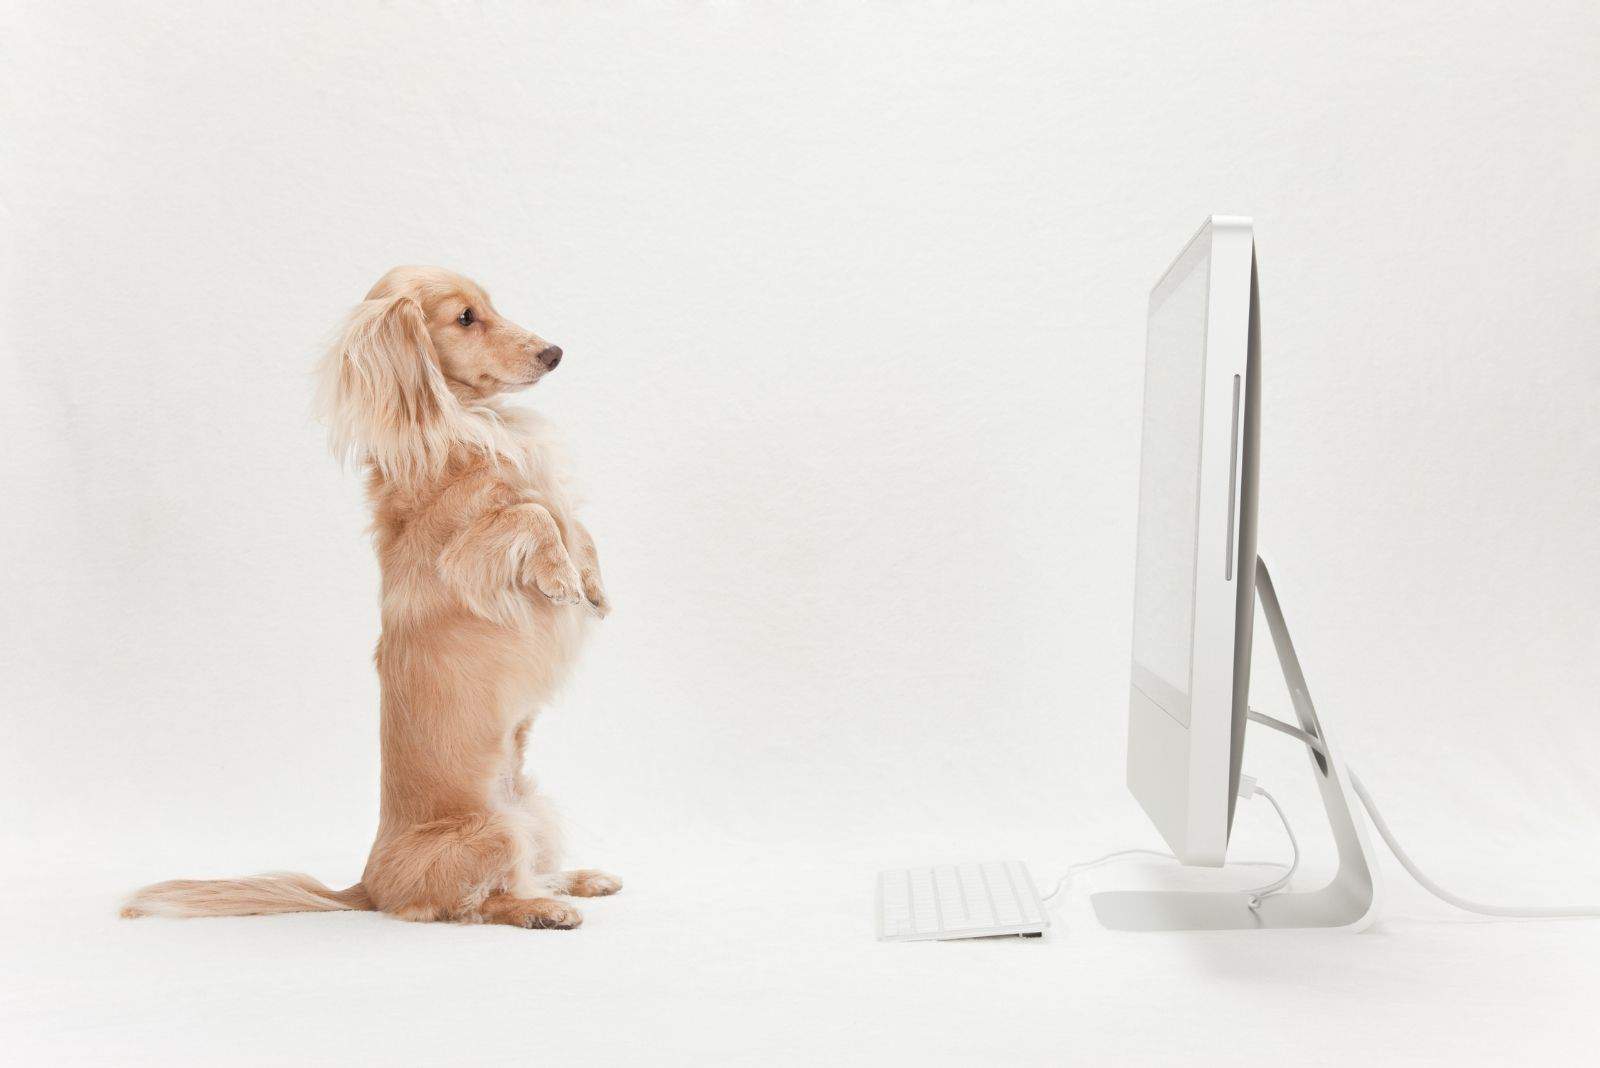 dachshund standing up infront of the monitor